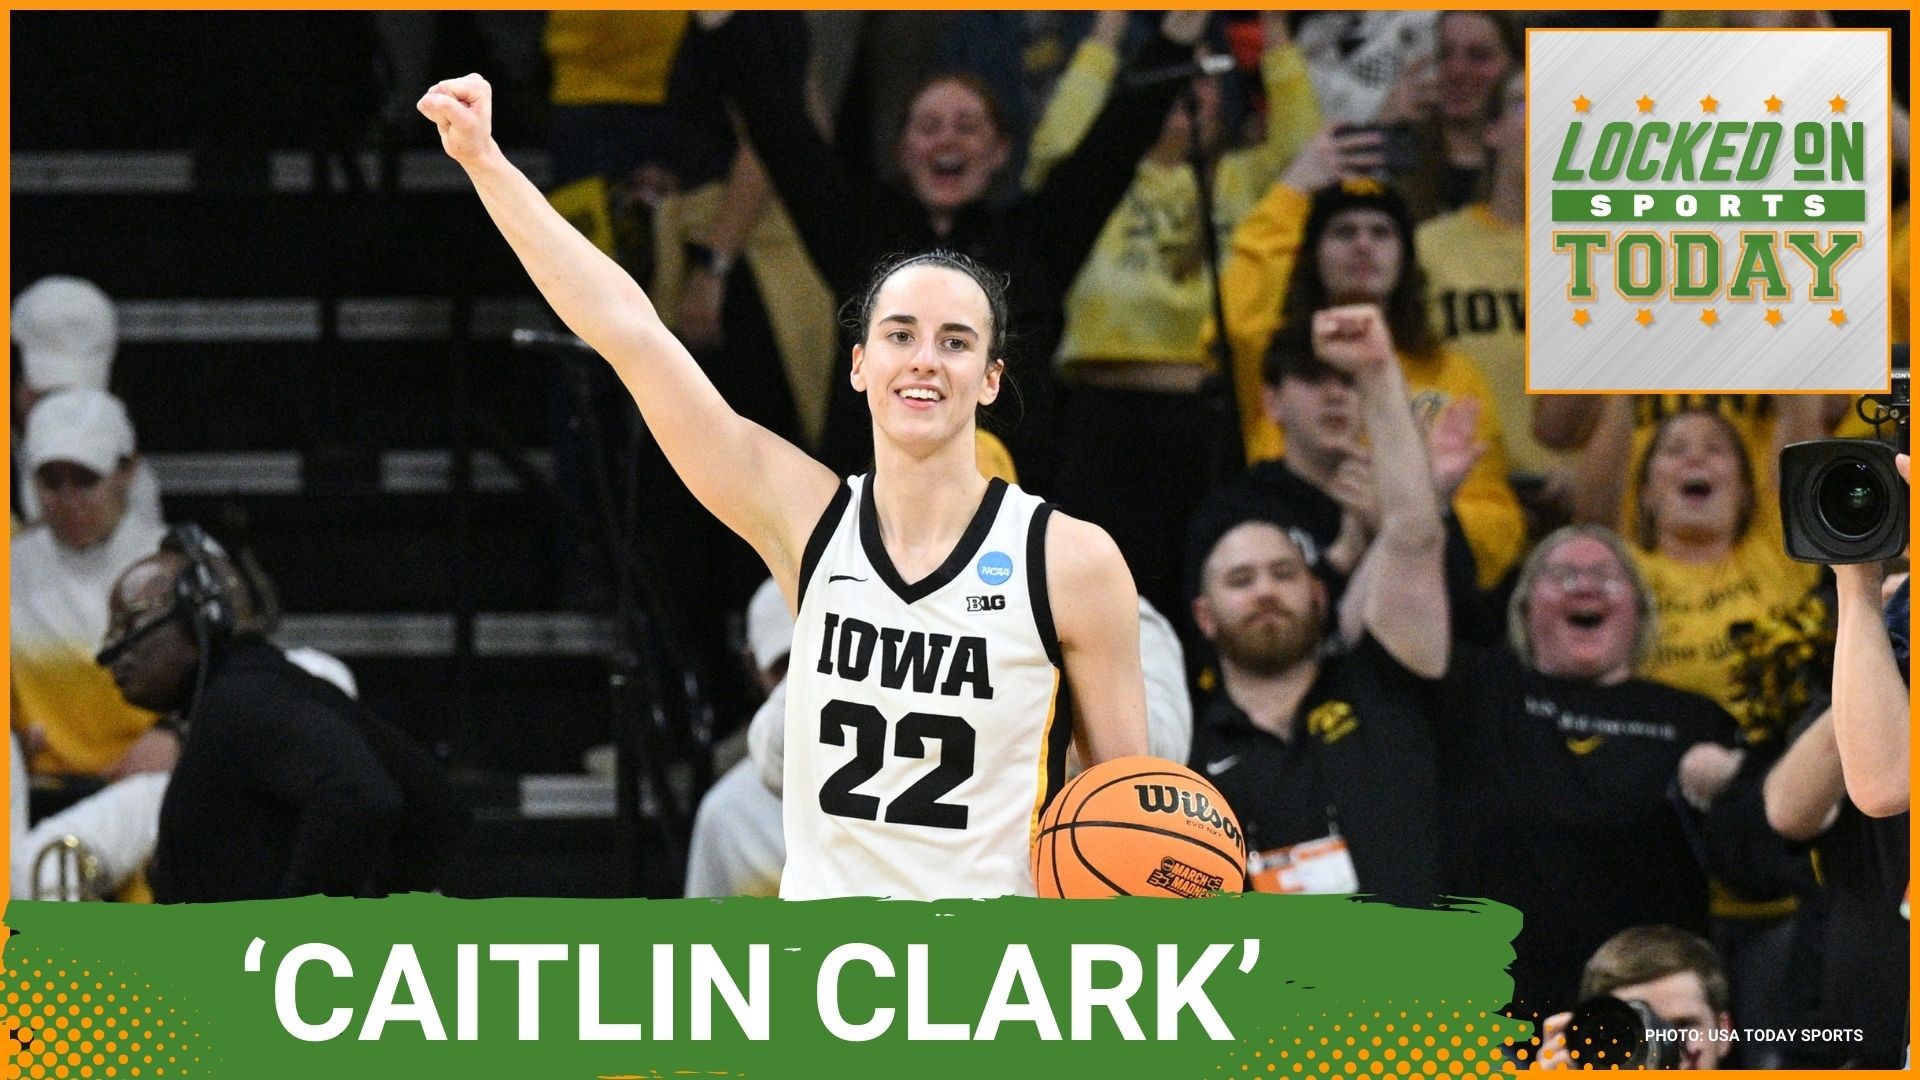 Caitlin Clark shows out in a night where the best were on display